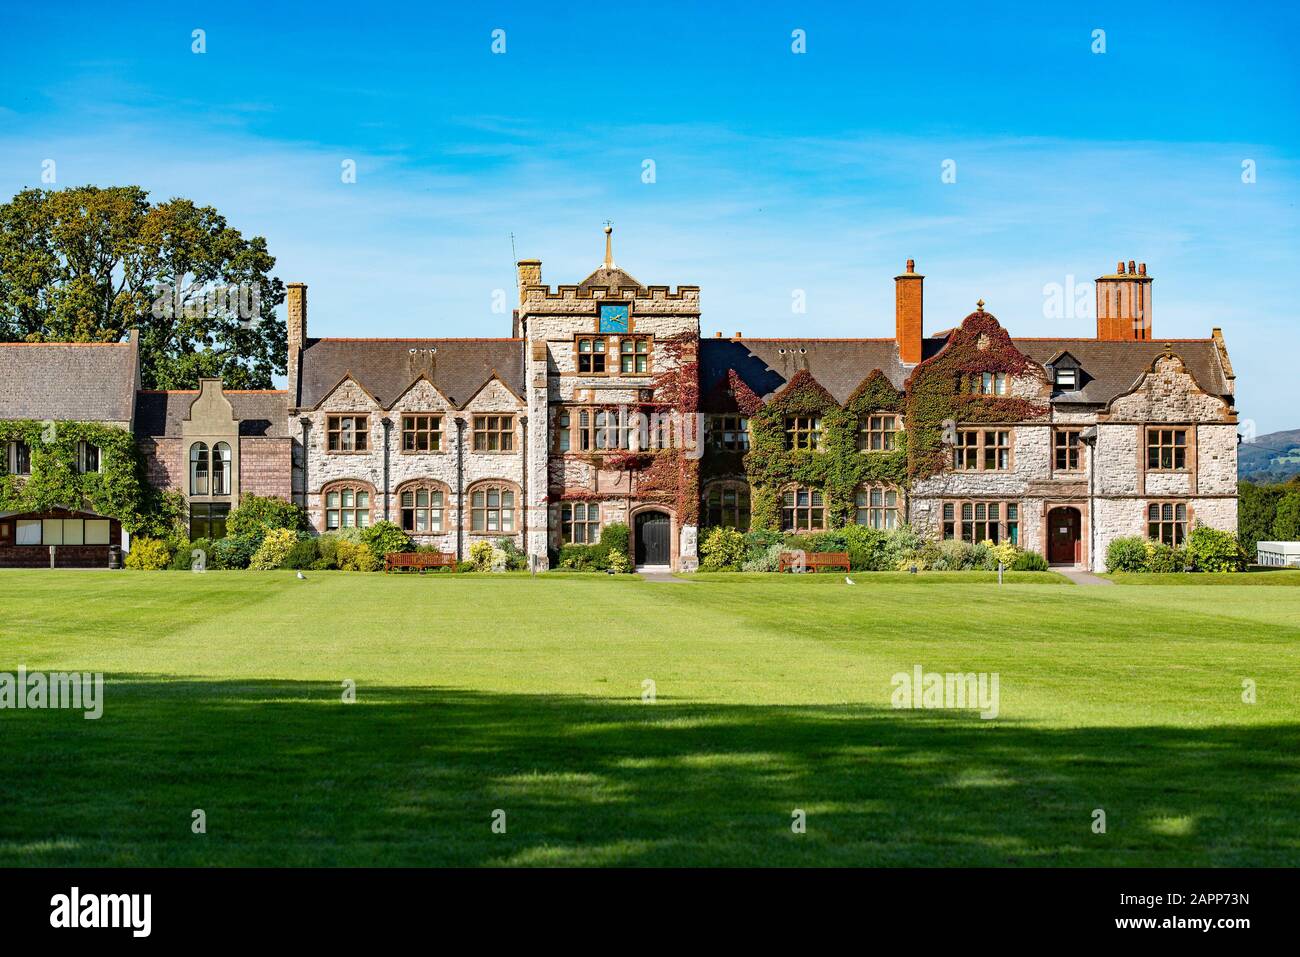 Ruthin School, a public school in Ruthin, the county town of Denbighshire, North Wales. At over 700 years old itÕs one of the oldest schools in the Un Stock Photo